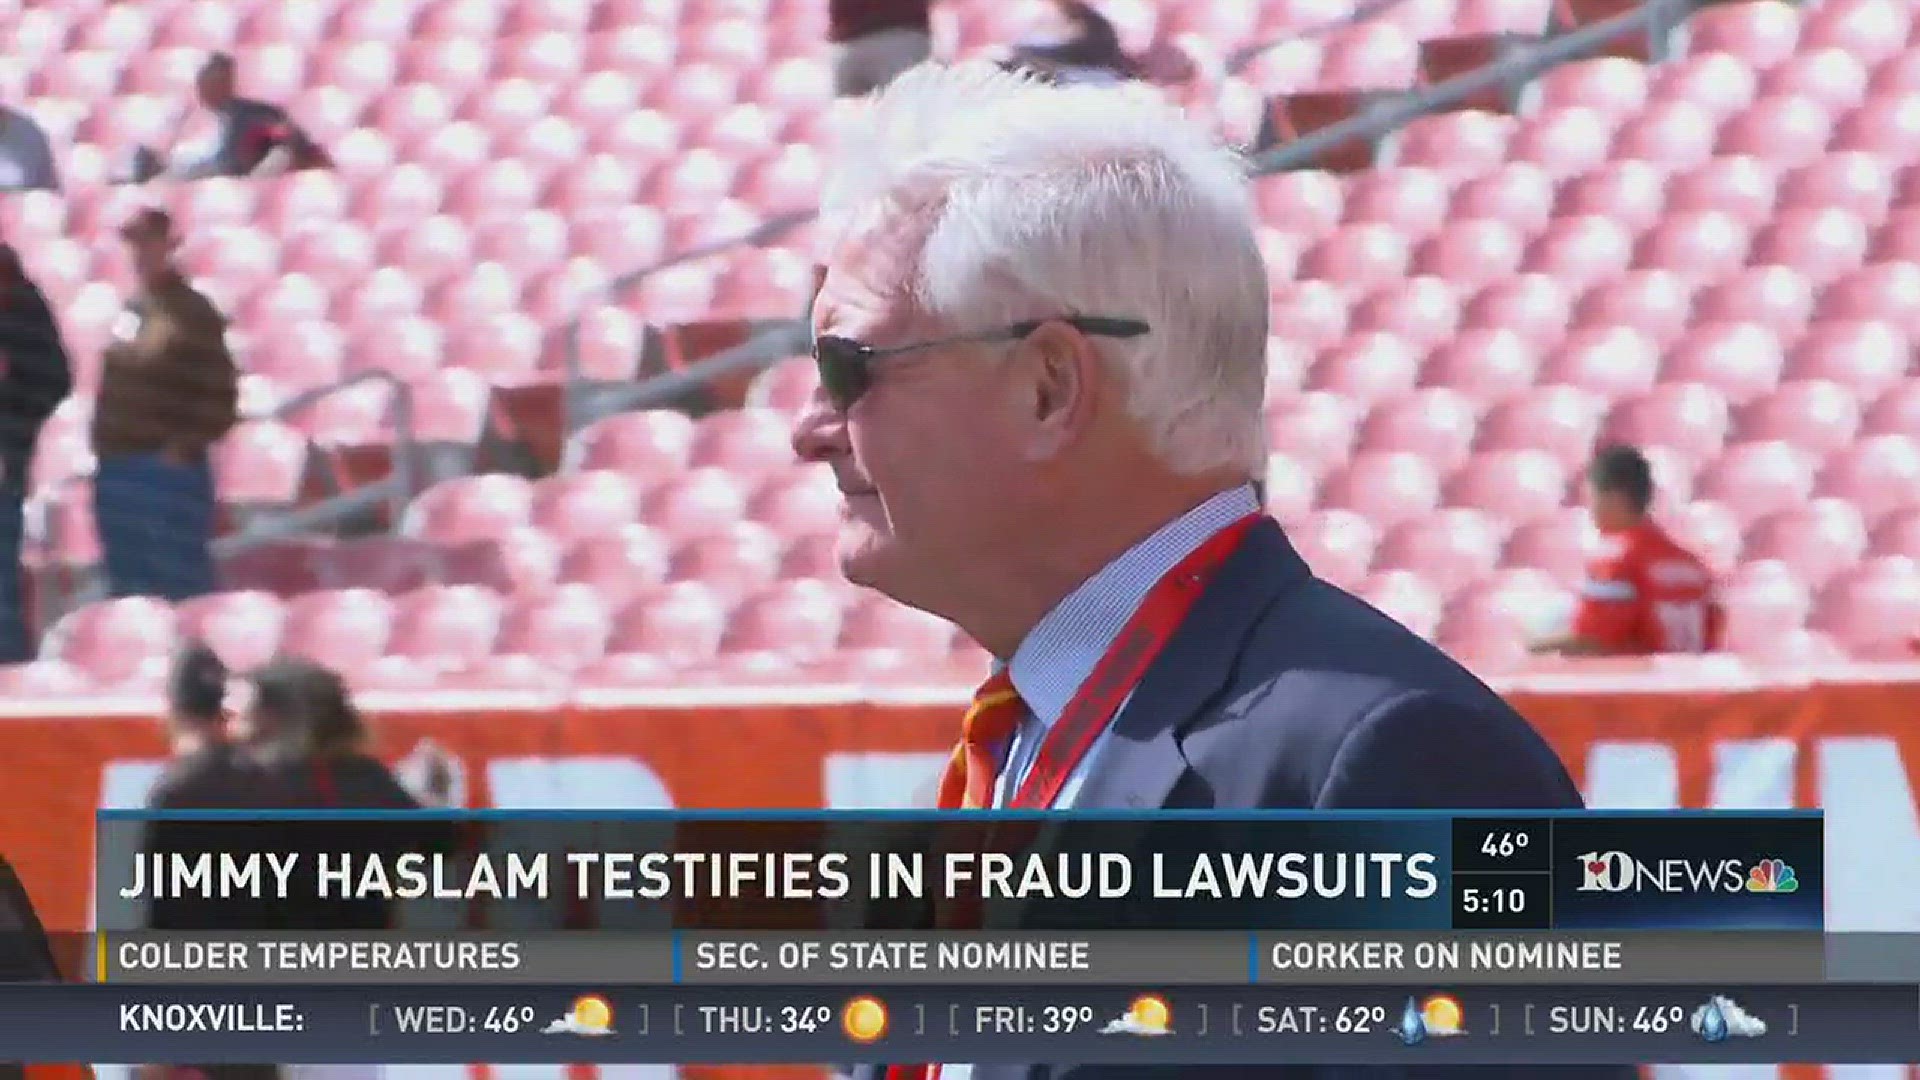 Pilot CEO Jimmy Haslam is giving a depostion in the fraud lawsuits